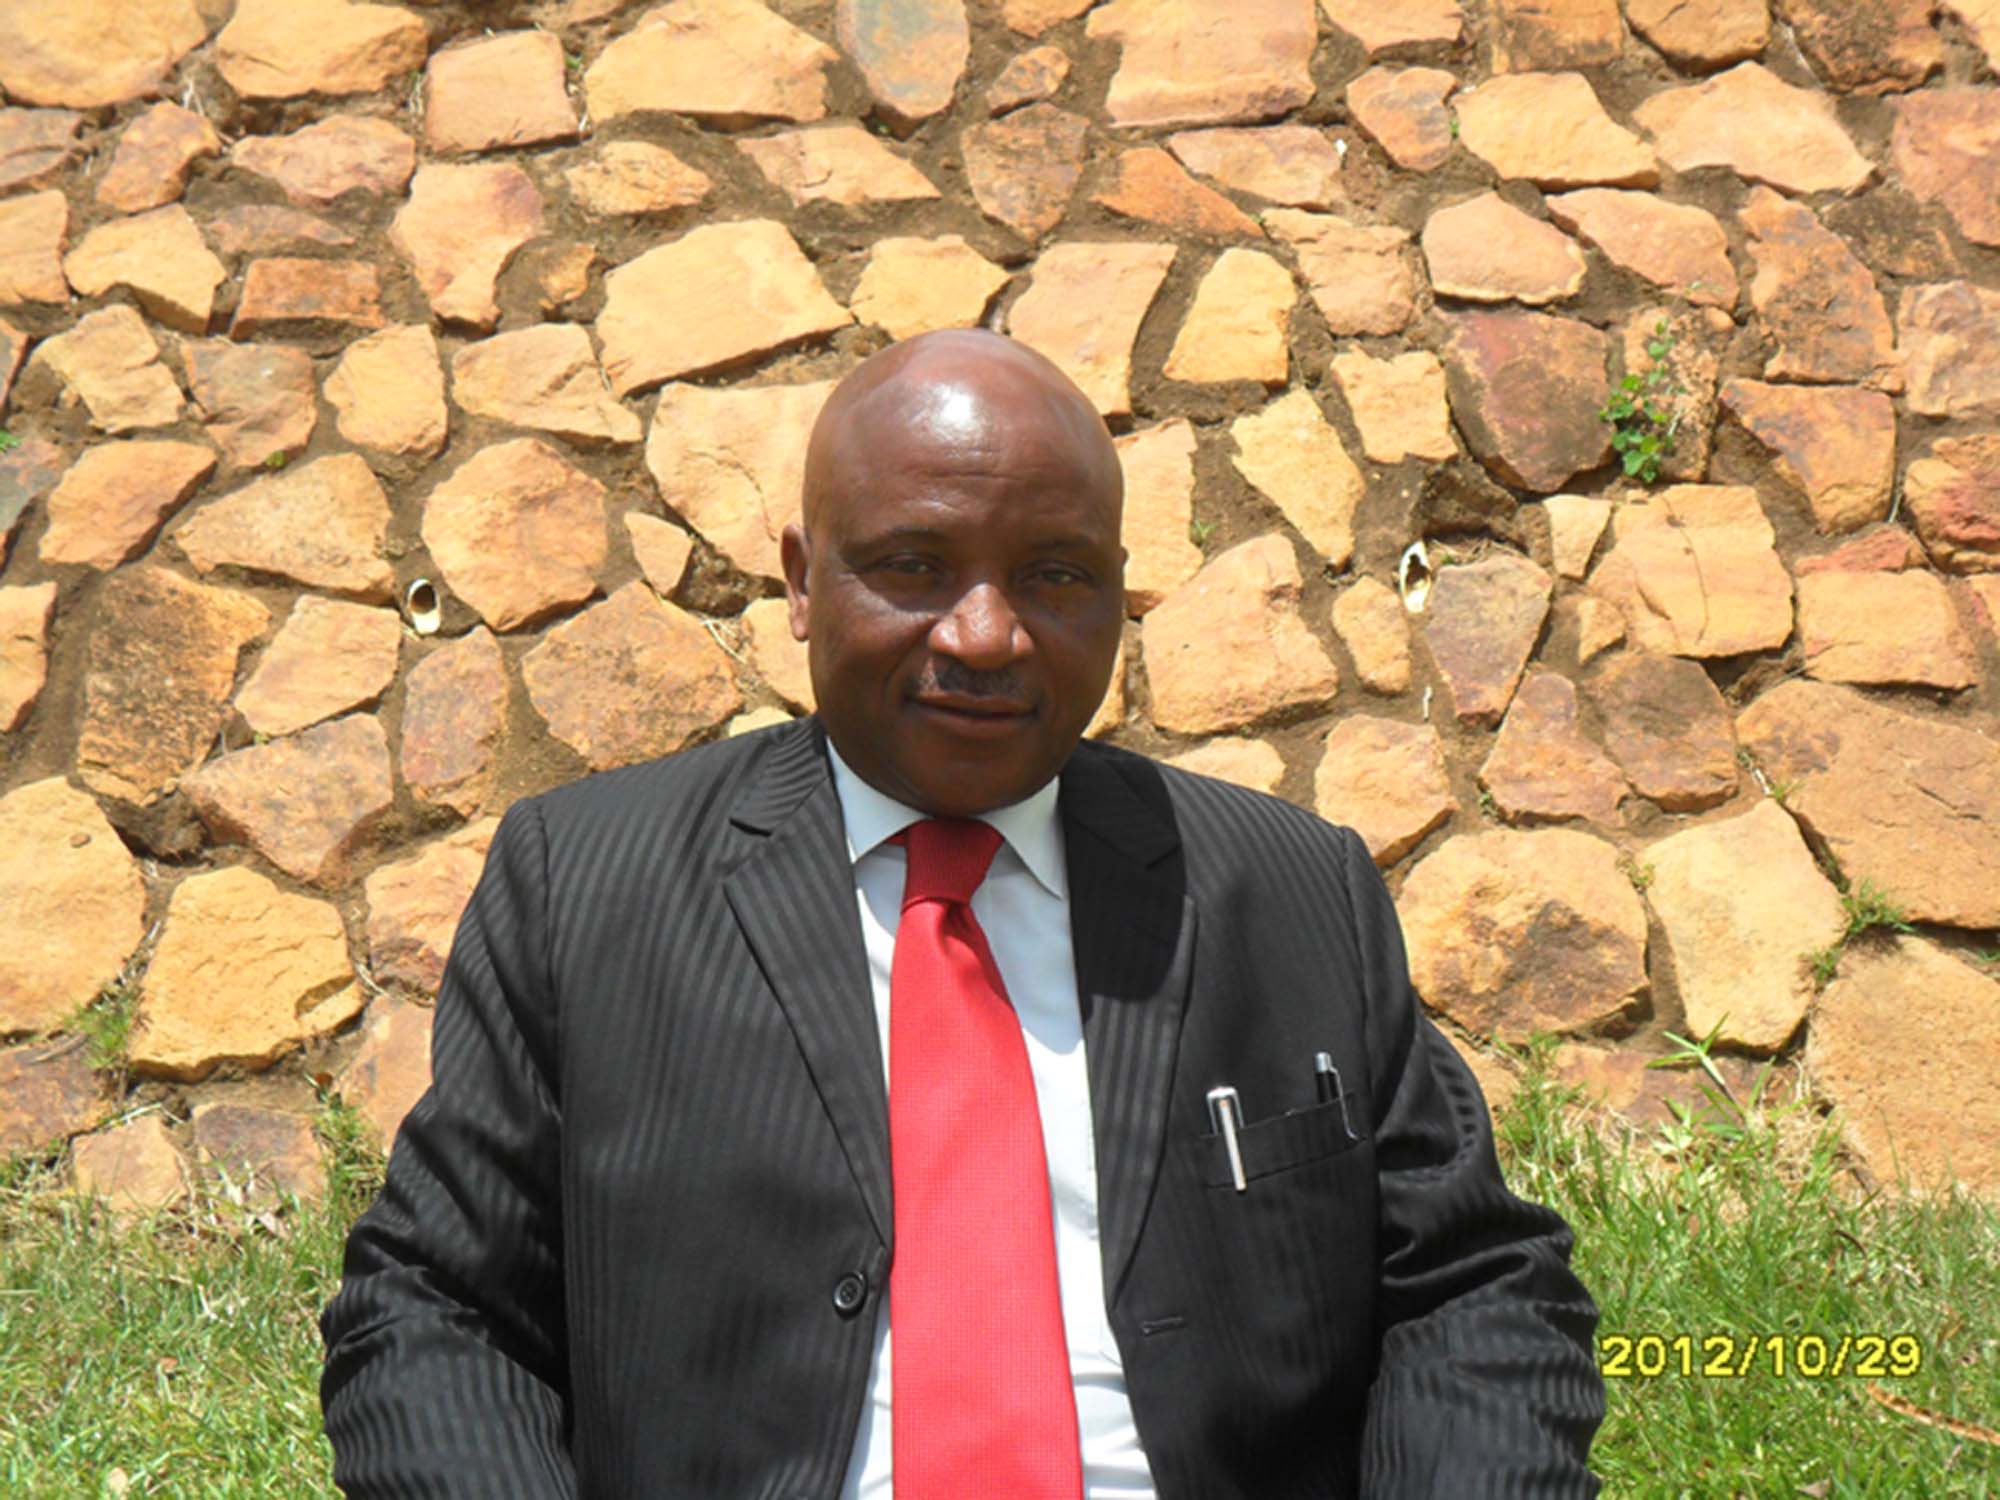 MZIMBA WEST CONSTITUENCY MP ACCUSES MUTHARIKA OF PRACTICING REGIONALISM